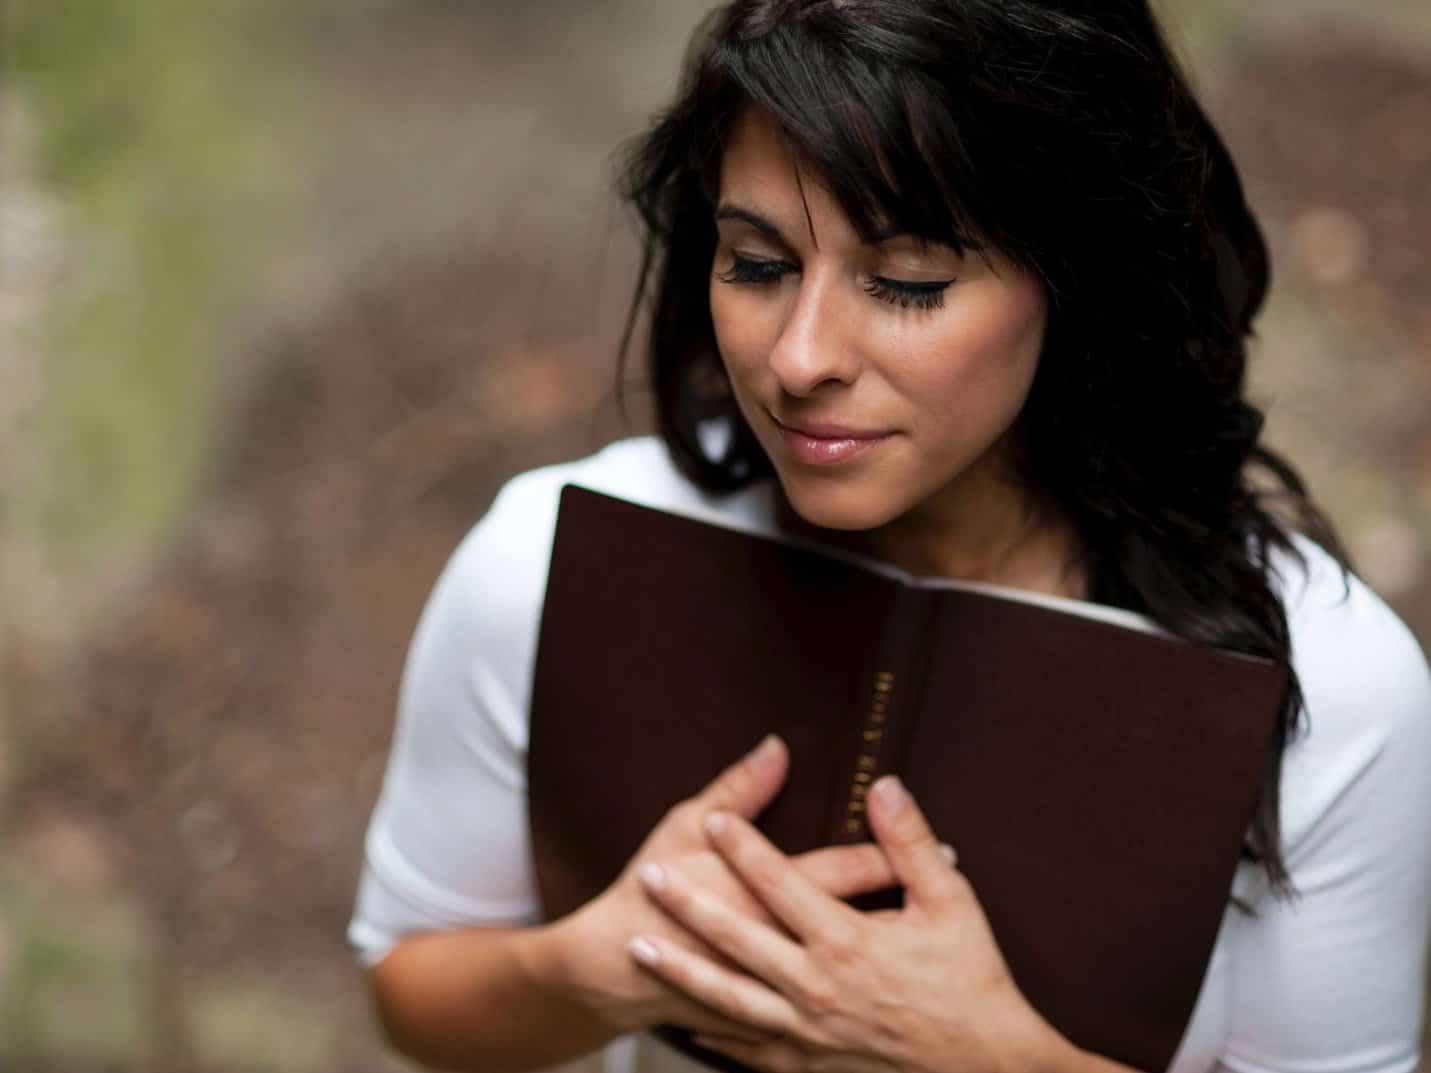 How to Bible Study Alone